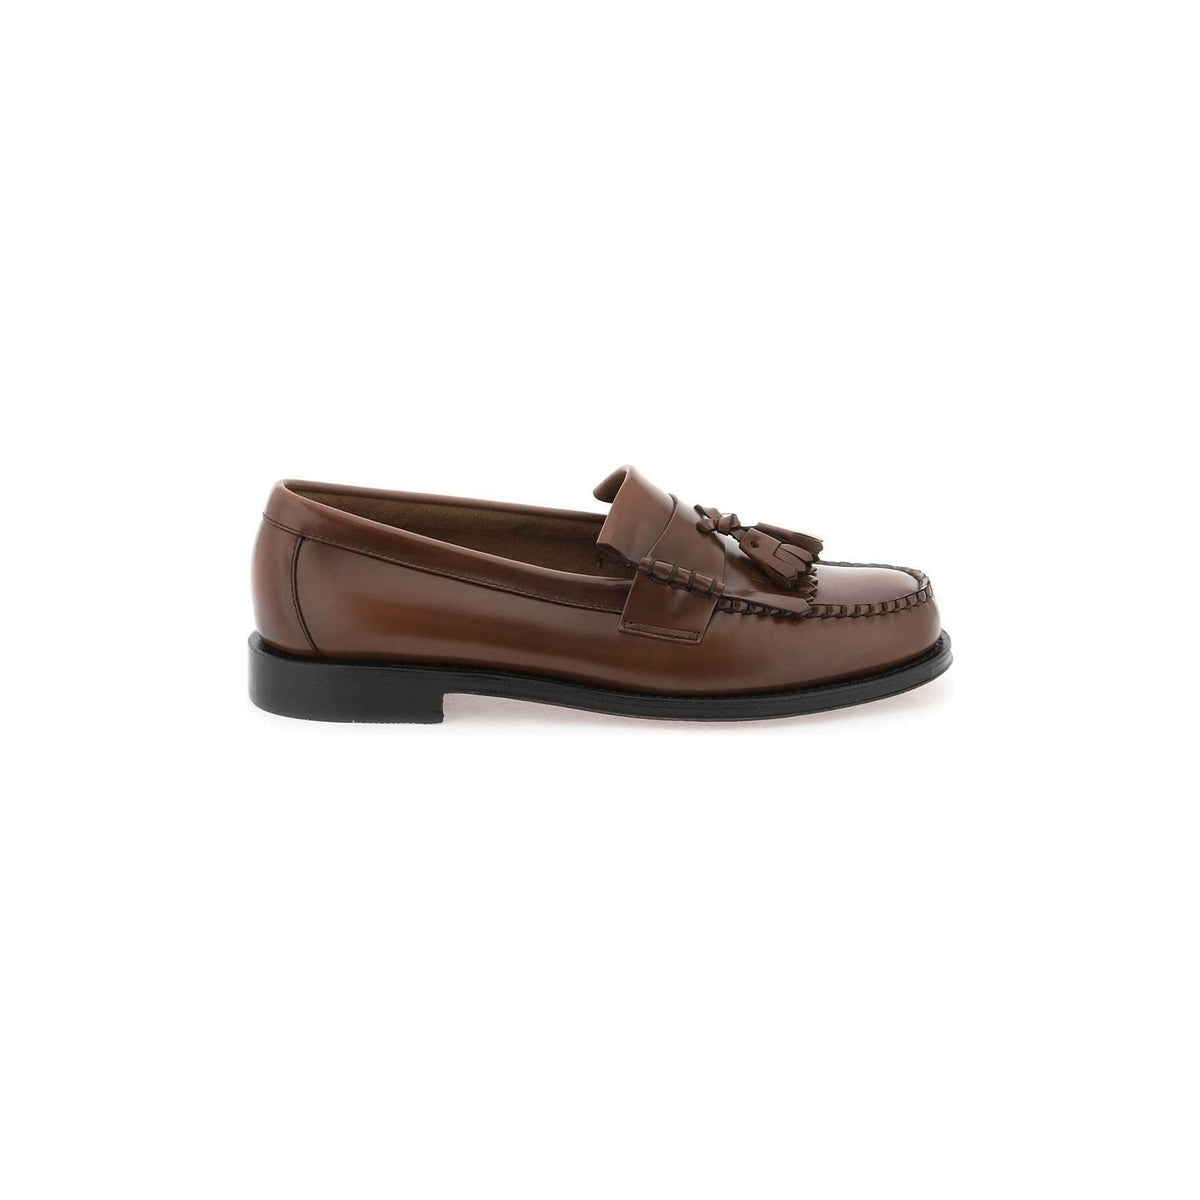 G.H. BASS - Mid Brown Leather Esther Kiltie Weejuns Loafers With Tassels - JOHN JULIA